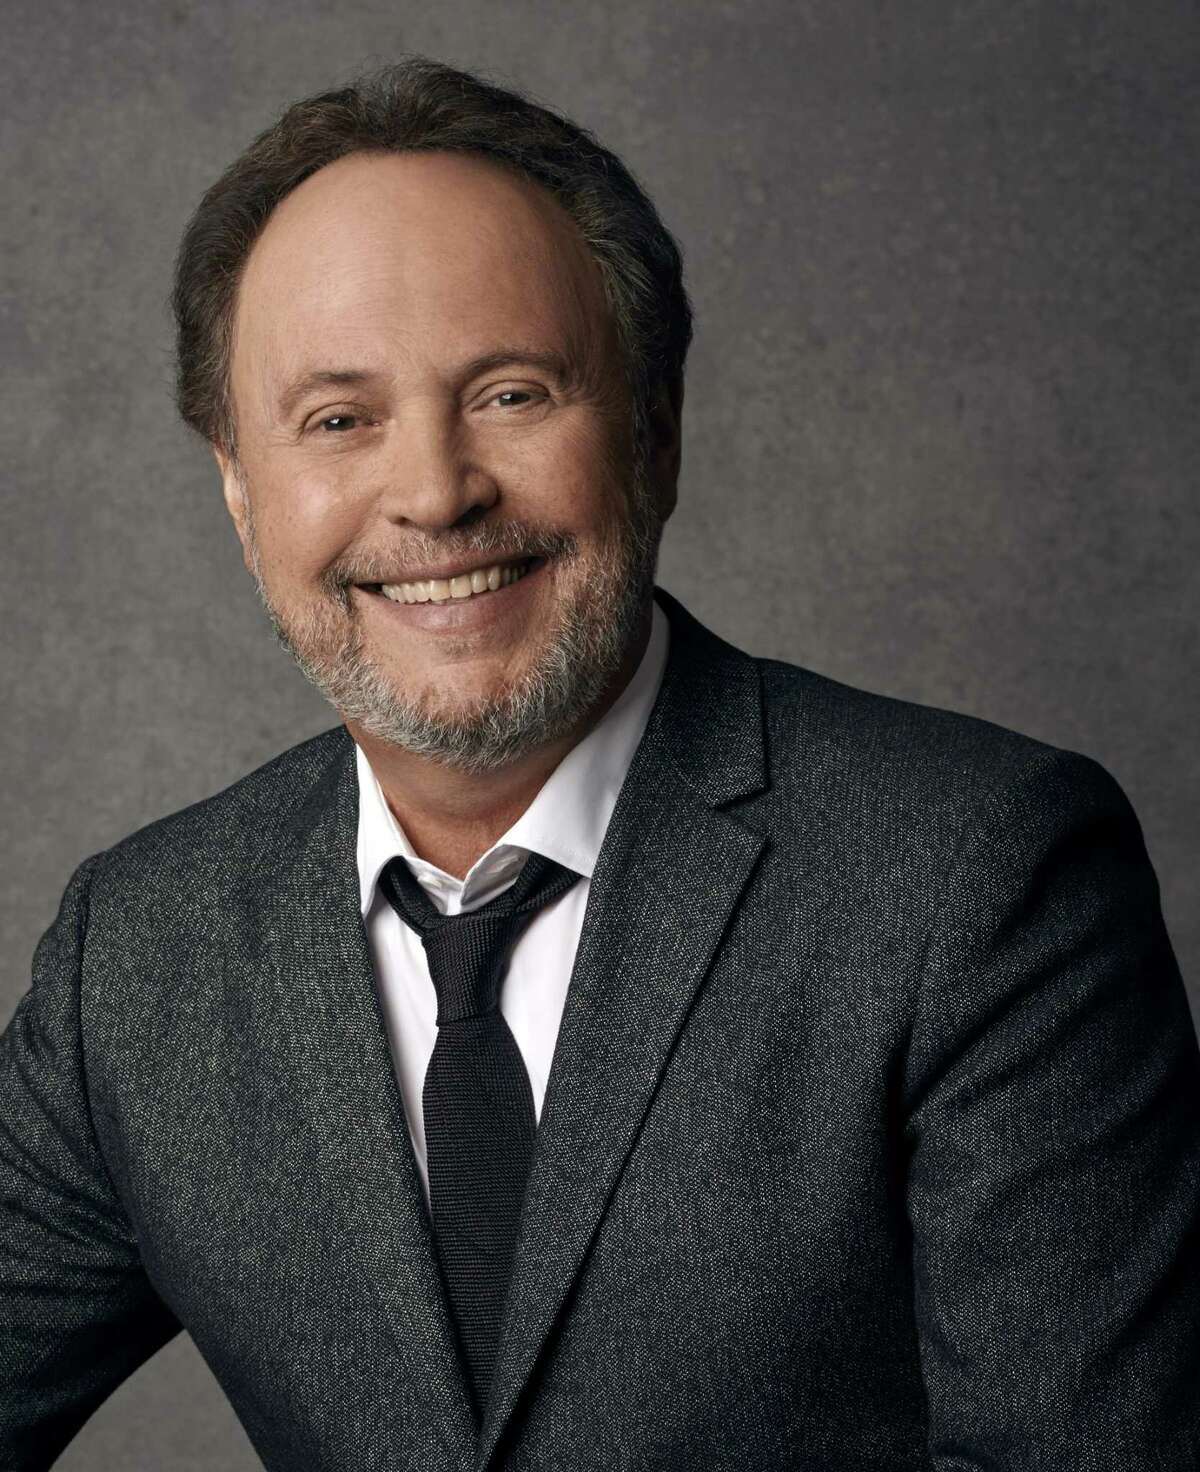 Billy Crystal returns to standup, reflects on love, growing older and